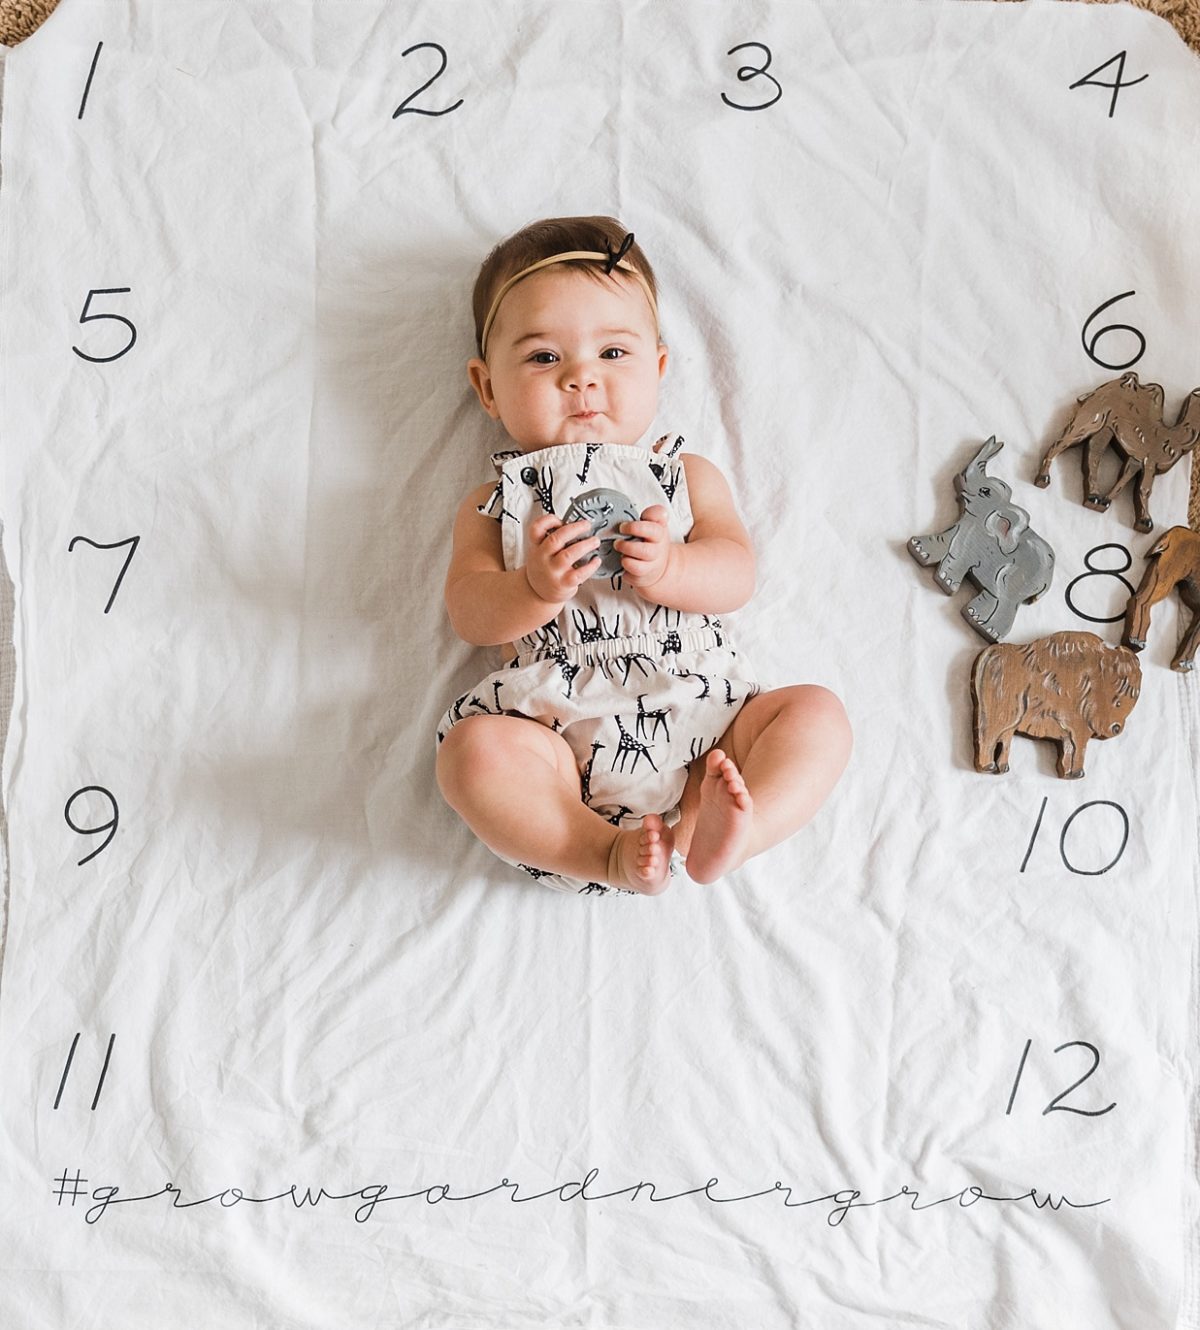 8 Months Young – Hatsy June